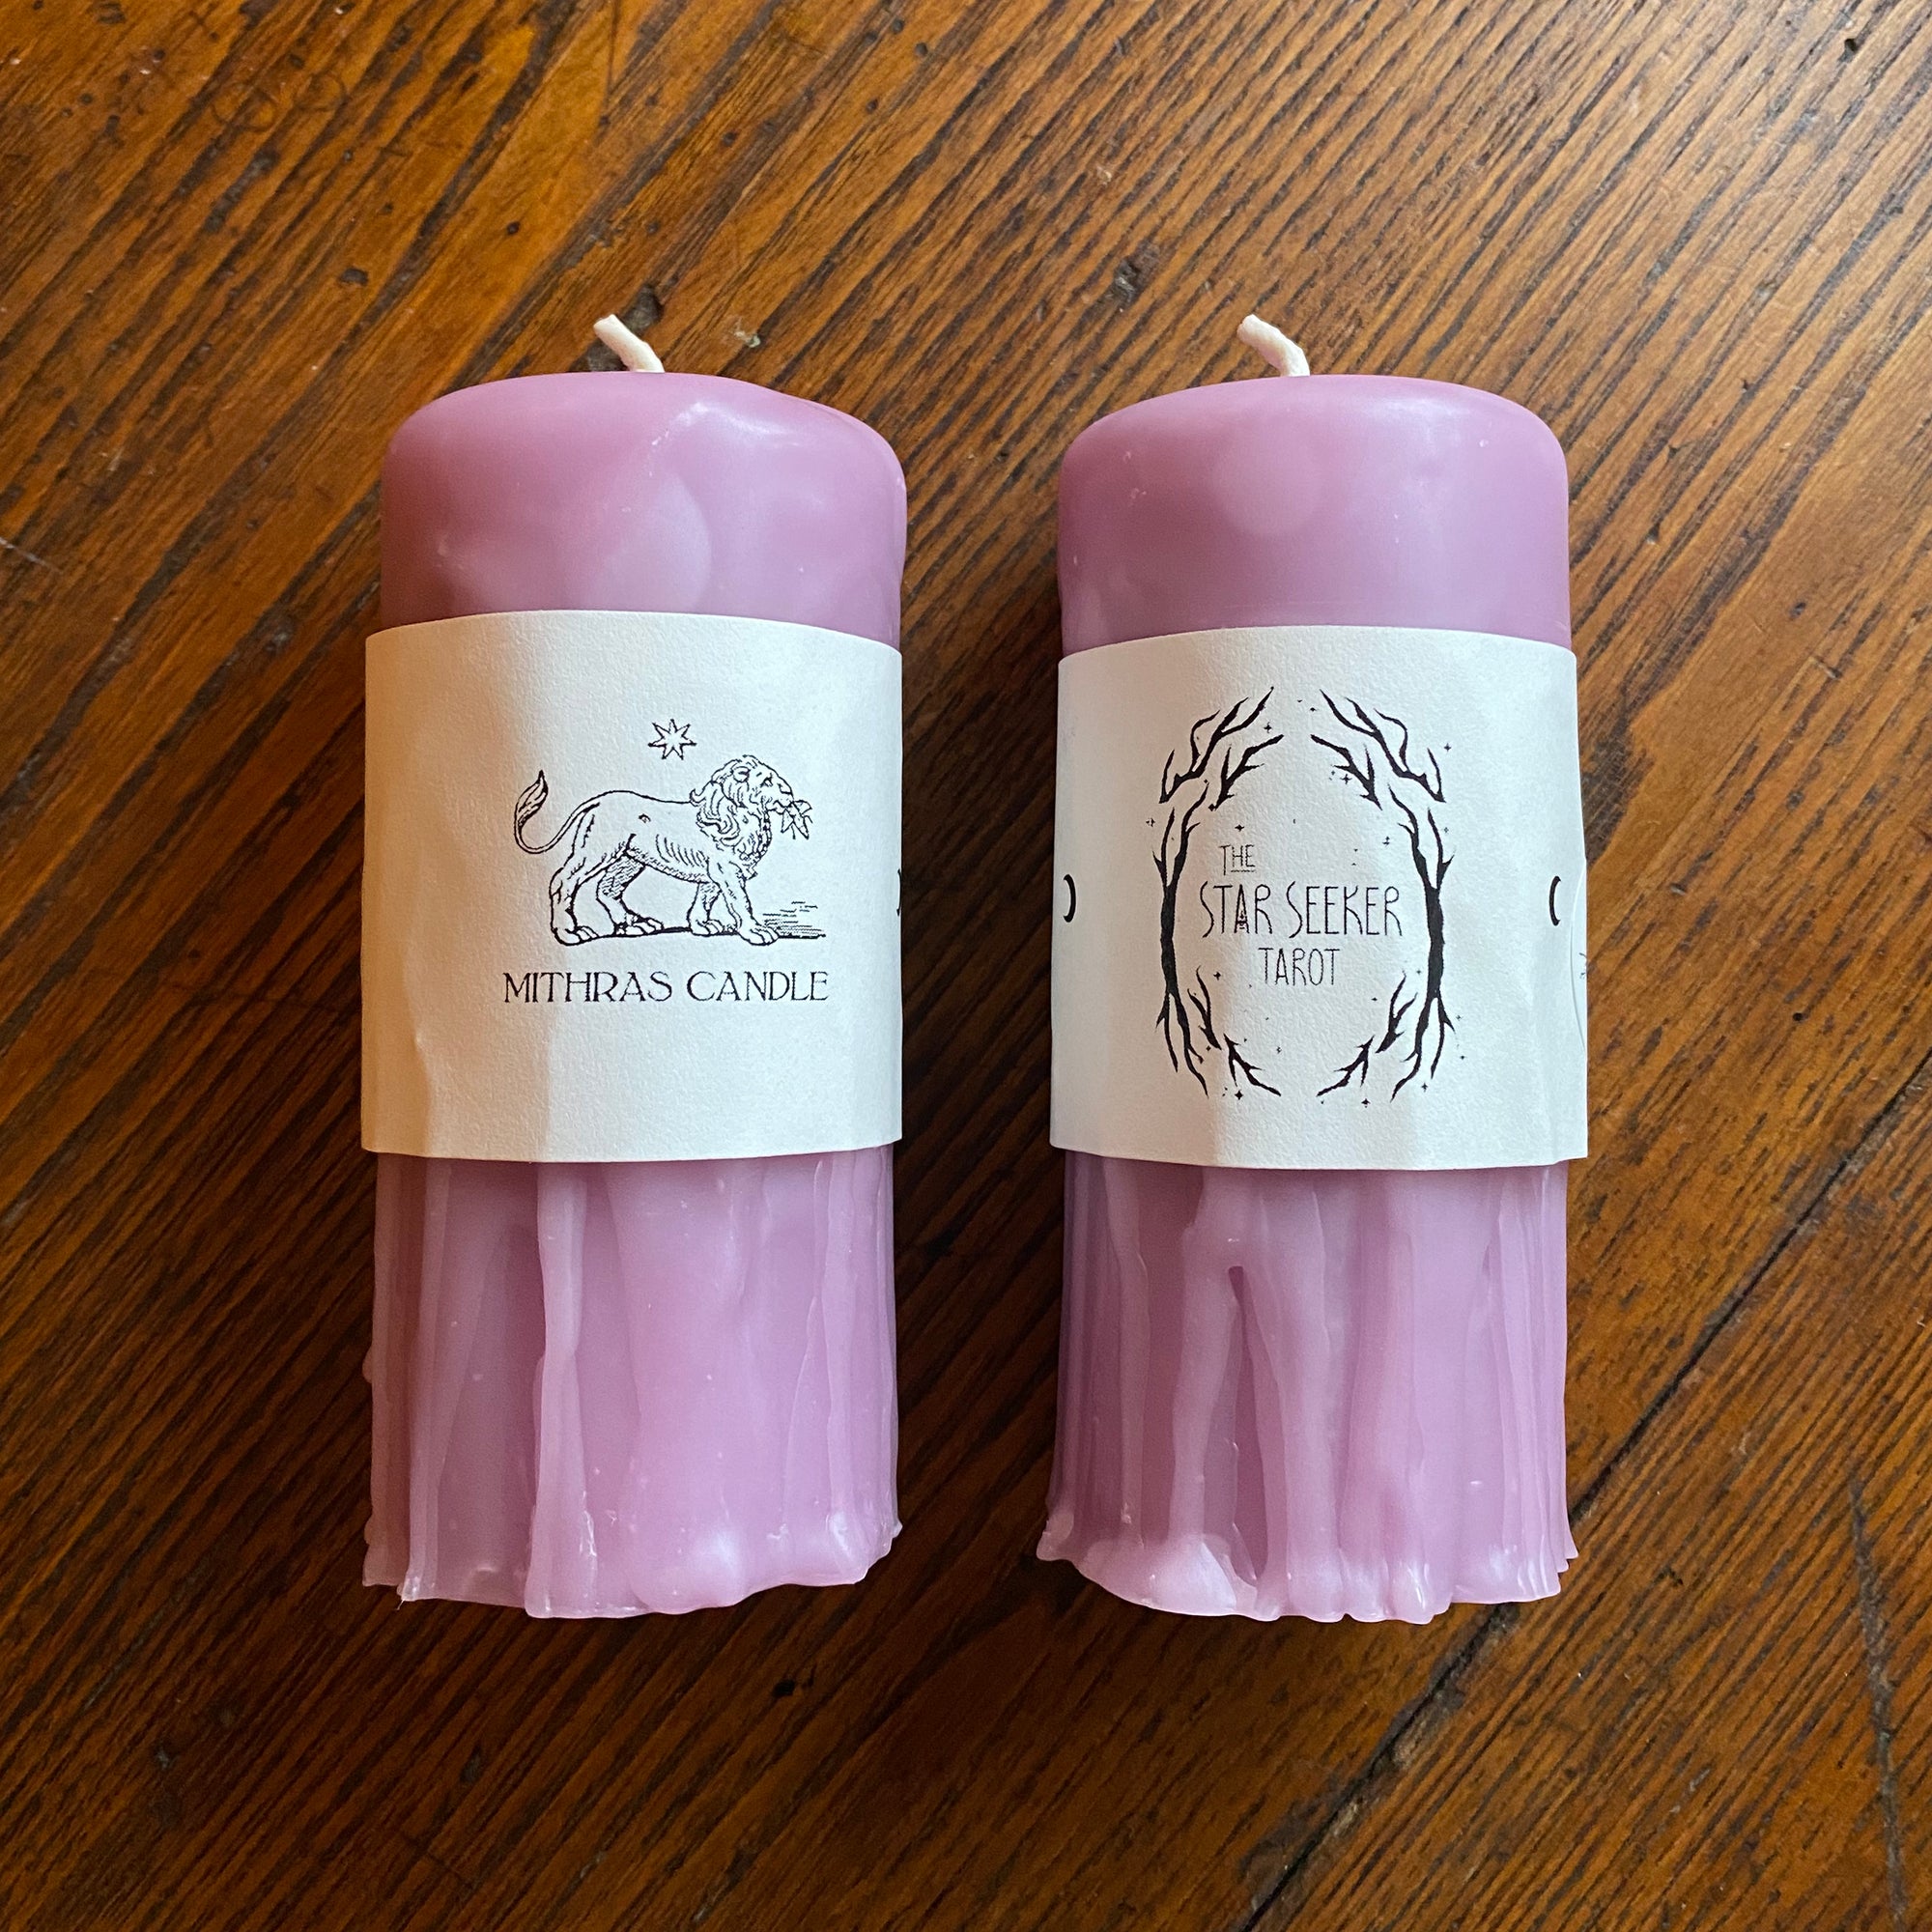 Star Seeker Tarot x Mithras Dusty Rose Dripped Candle 4.5"